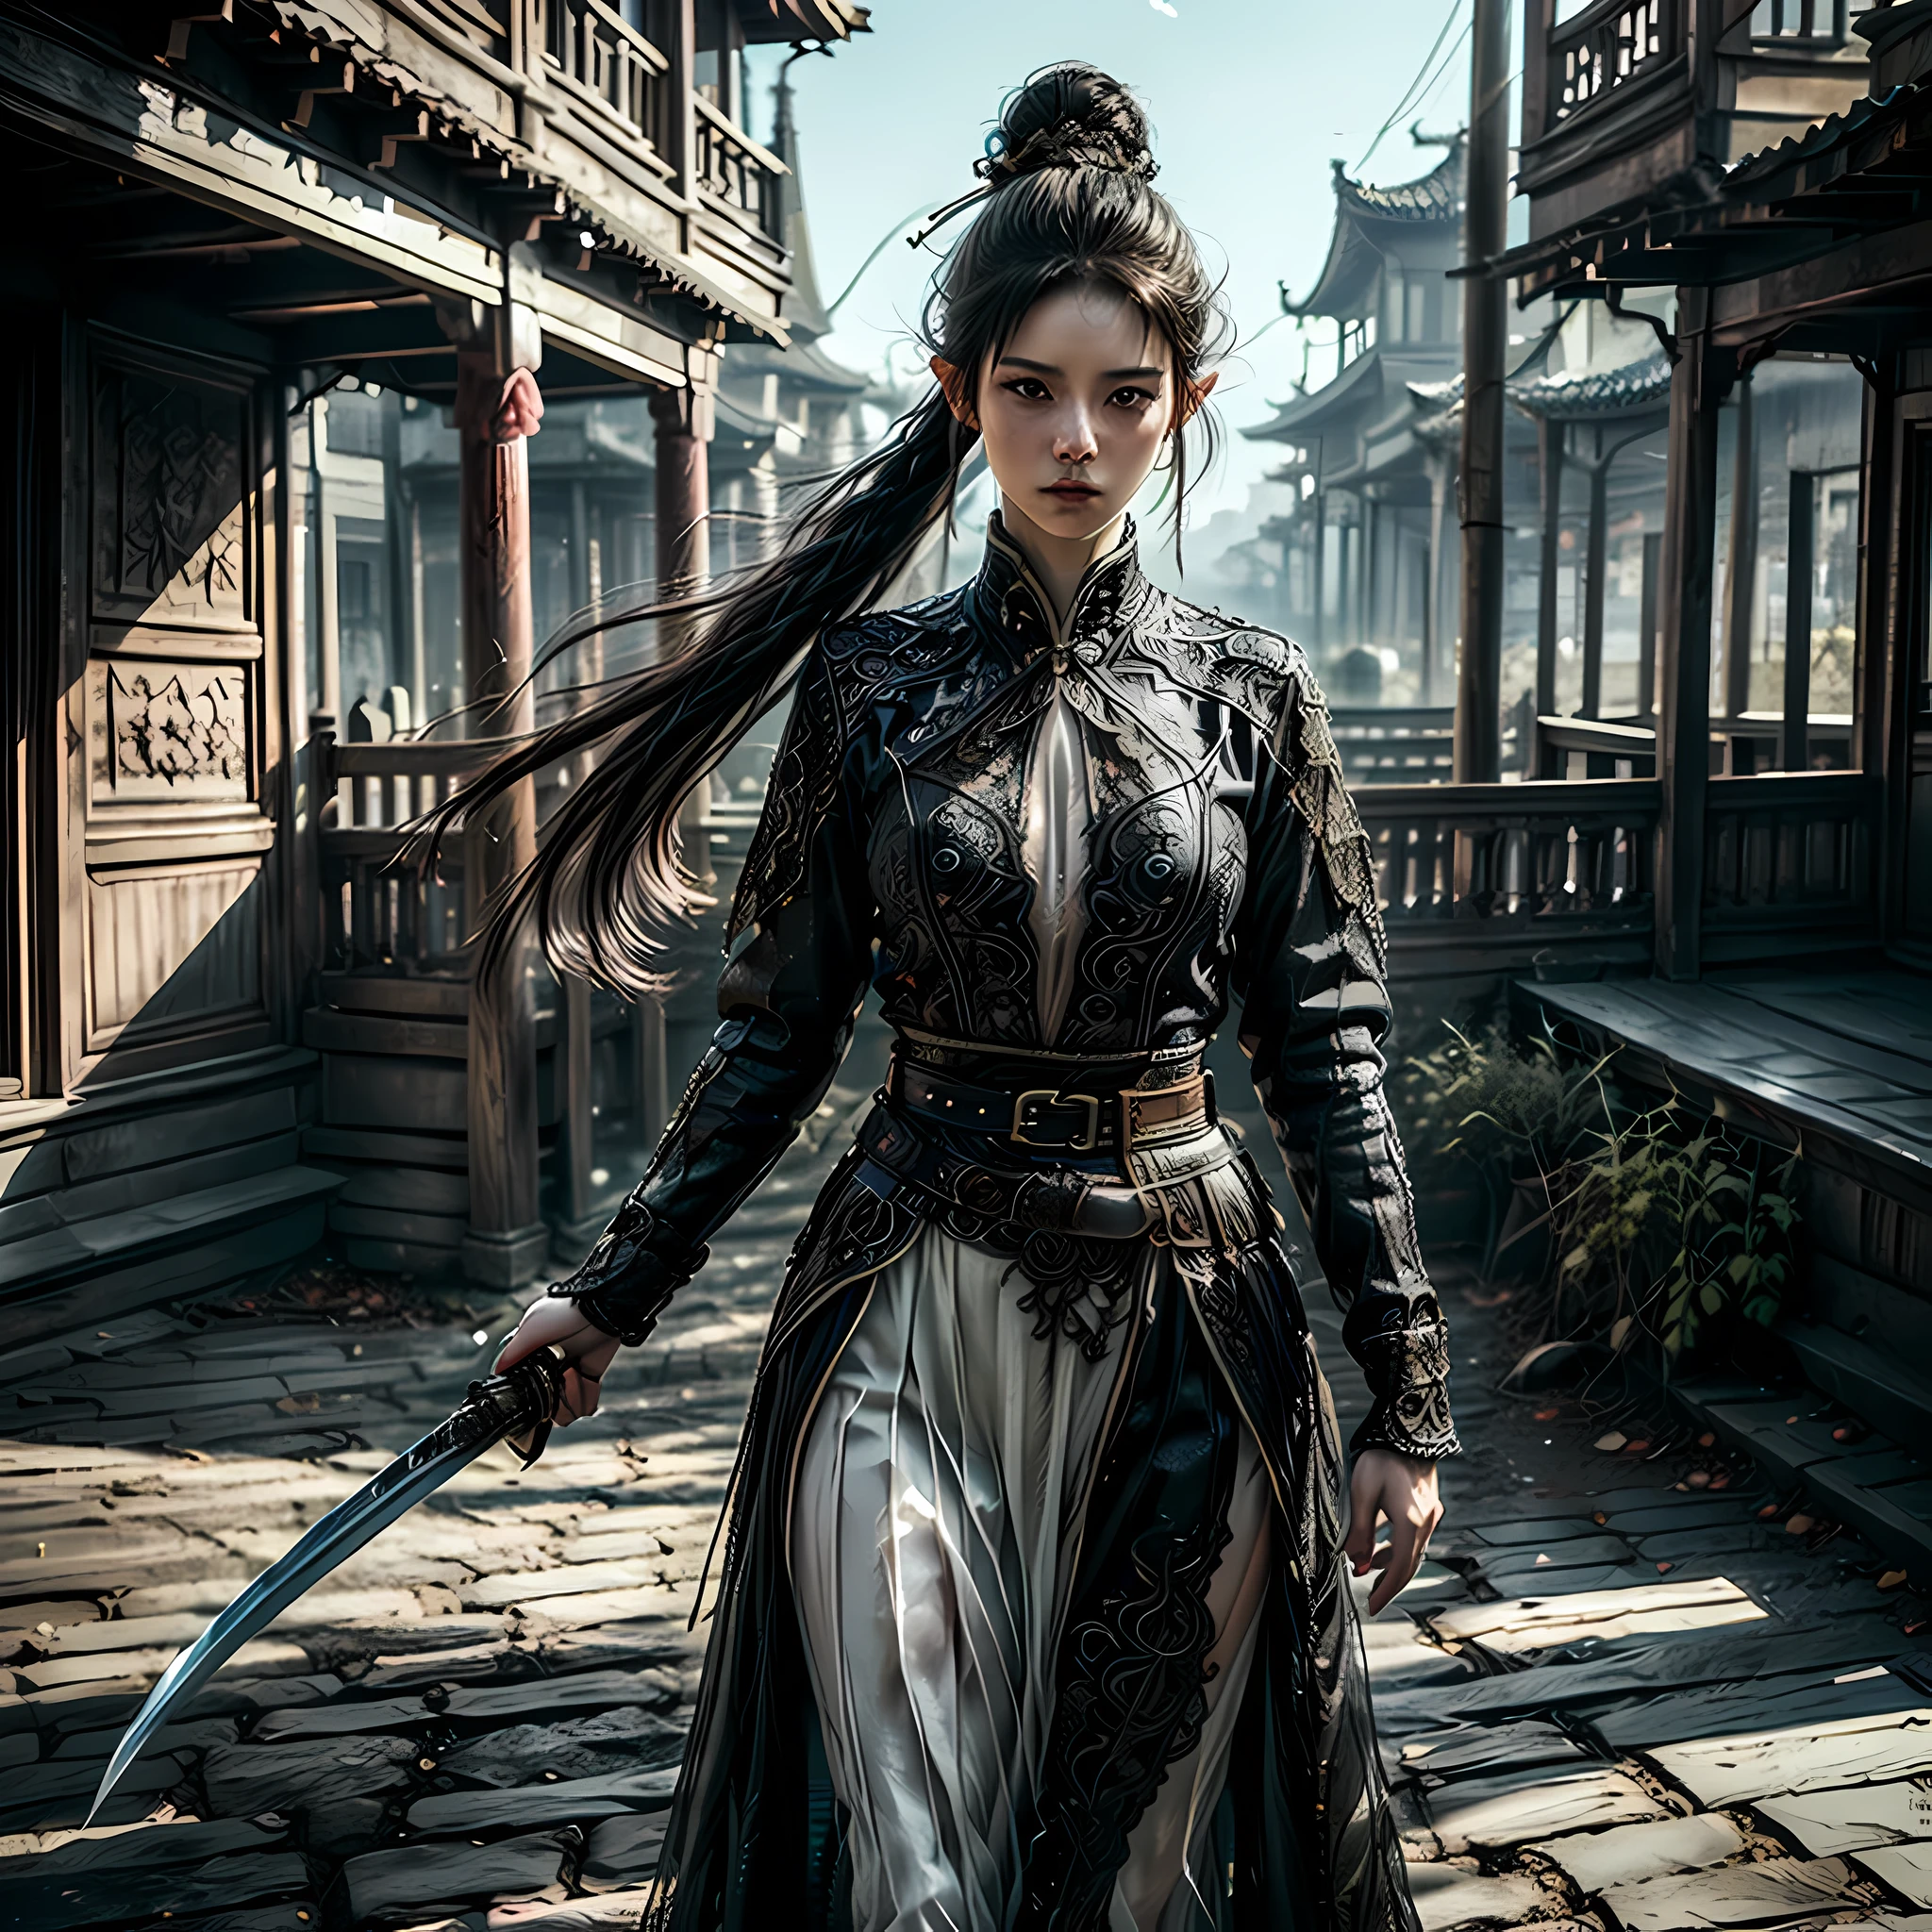 a picture of a female elf (intense details, Masterpiece, best quality: 1.5) fantasy swashbuckler, fantasy fencer, armed with a slim sword, shinning sword, metallic shine, colorful clothes, dynamic clothing, an ultra wide shot, full body (intense details, Masterpiece, best quality: 1.5)epic beautiful female elf (intense details, Masterpiece, best quality: 1.5), rich hair, braided hair, small pointed ears, GlowingRunes_pink [colorful magical sigils in the air],[ colorful arcane markings floating] (intricate details, Masterpiece, best quality: 1.6), holding a [sword] (intricate details, Masterpiece, best quality: 1.6) holding a [sword glowing in red light]fantasy urban street (intense details, Masterpiece, best quality: 1.5),  purple cloak, long cloak (intense details, Masterpiece, best quality: 1.5), sense of daring, sense of adventure,  high details, best quality, 8k, [ultra detailed], masterpiece, best quality, (extremely detailed), dynamic angle, ultra wide shot, photorealistic, RAW, fantasy art, dnd art,fantasy art, realistic art, xuer Ancient Chinese sword